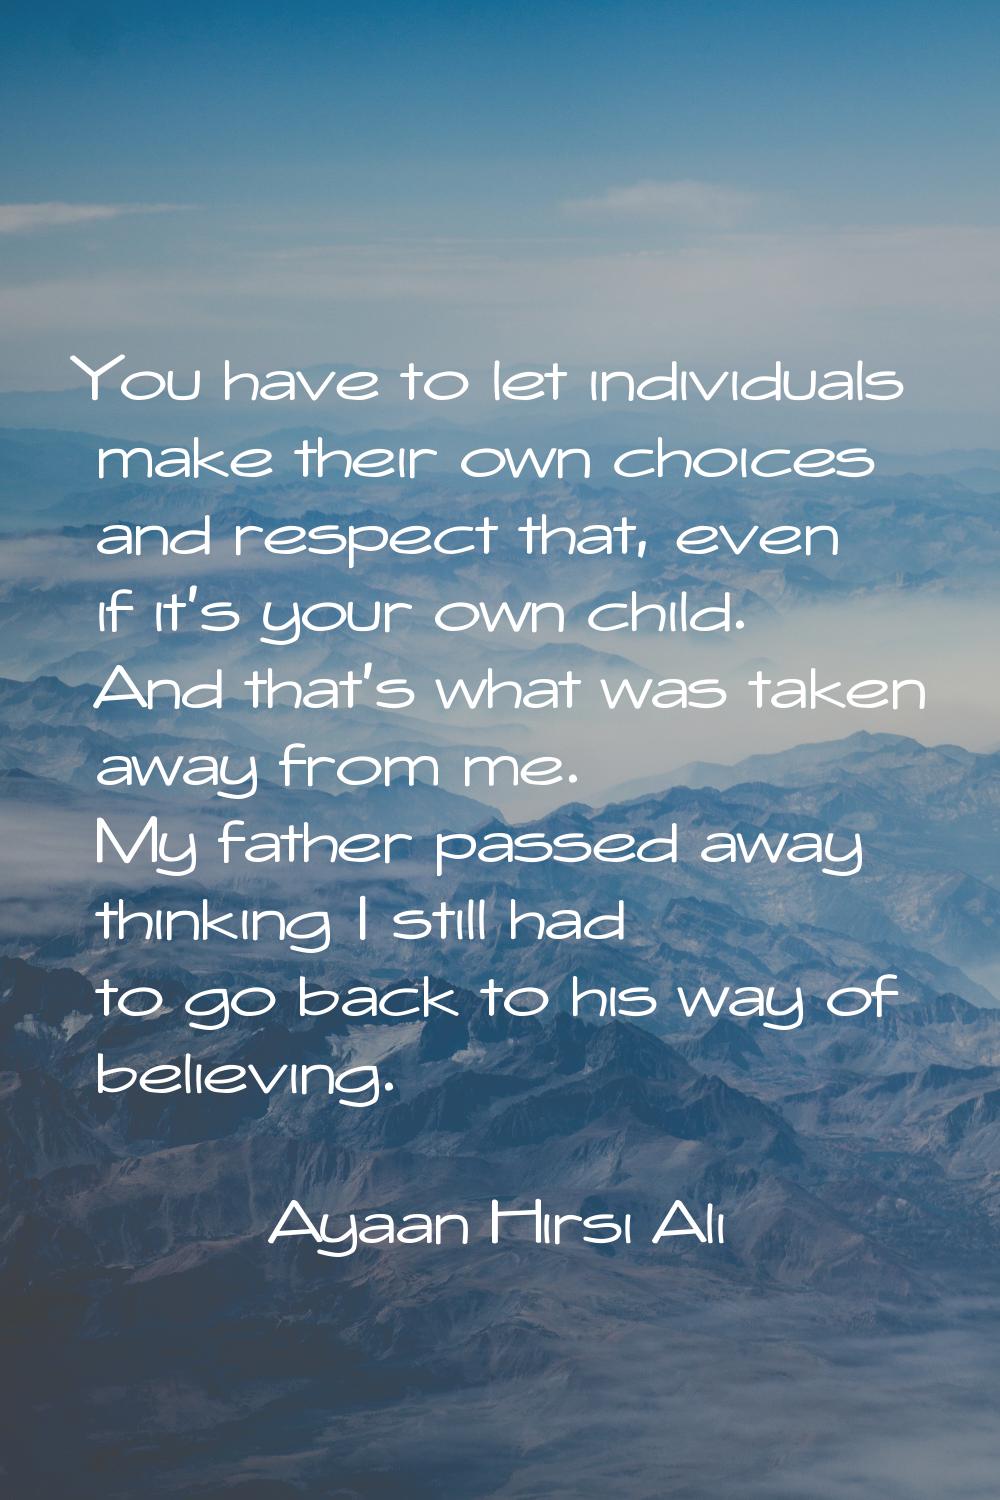 You have to let individuals make their own choices and respect that, even if it's your own child. A